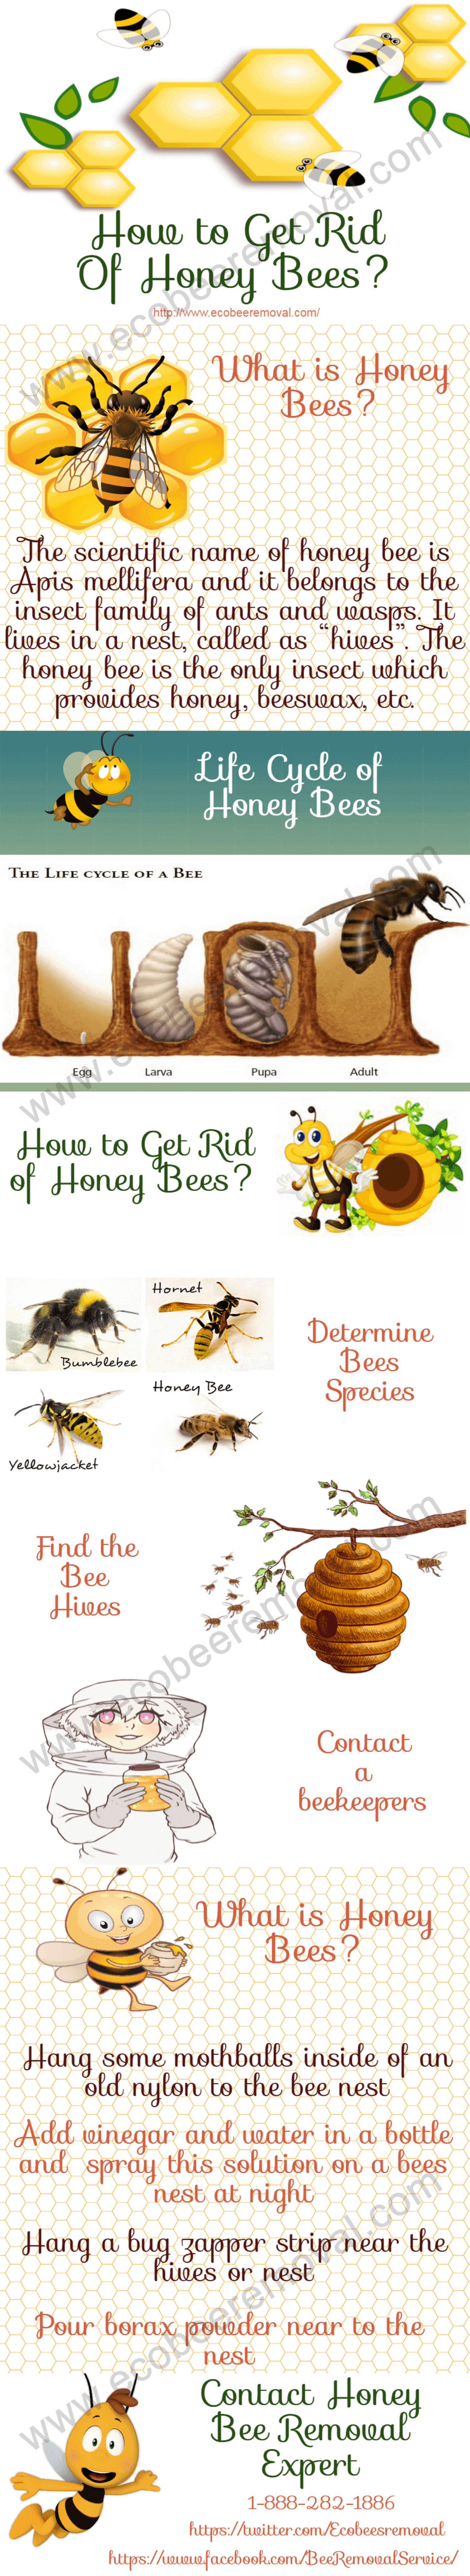 How to Get Rid from Honey Bees?  Infographic